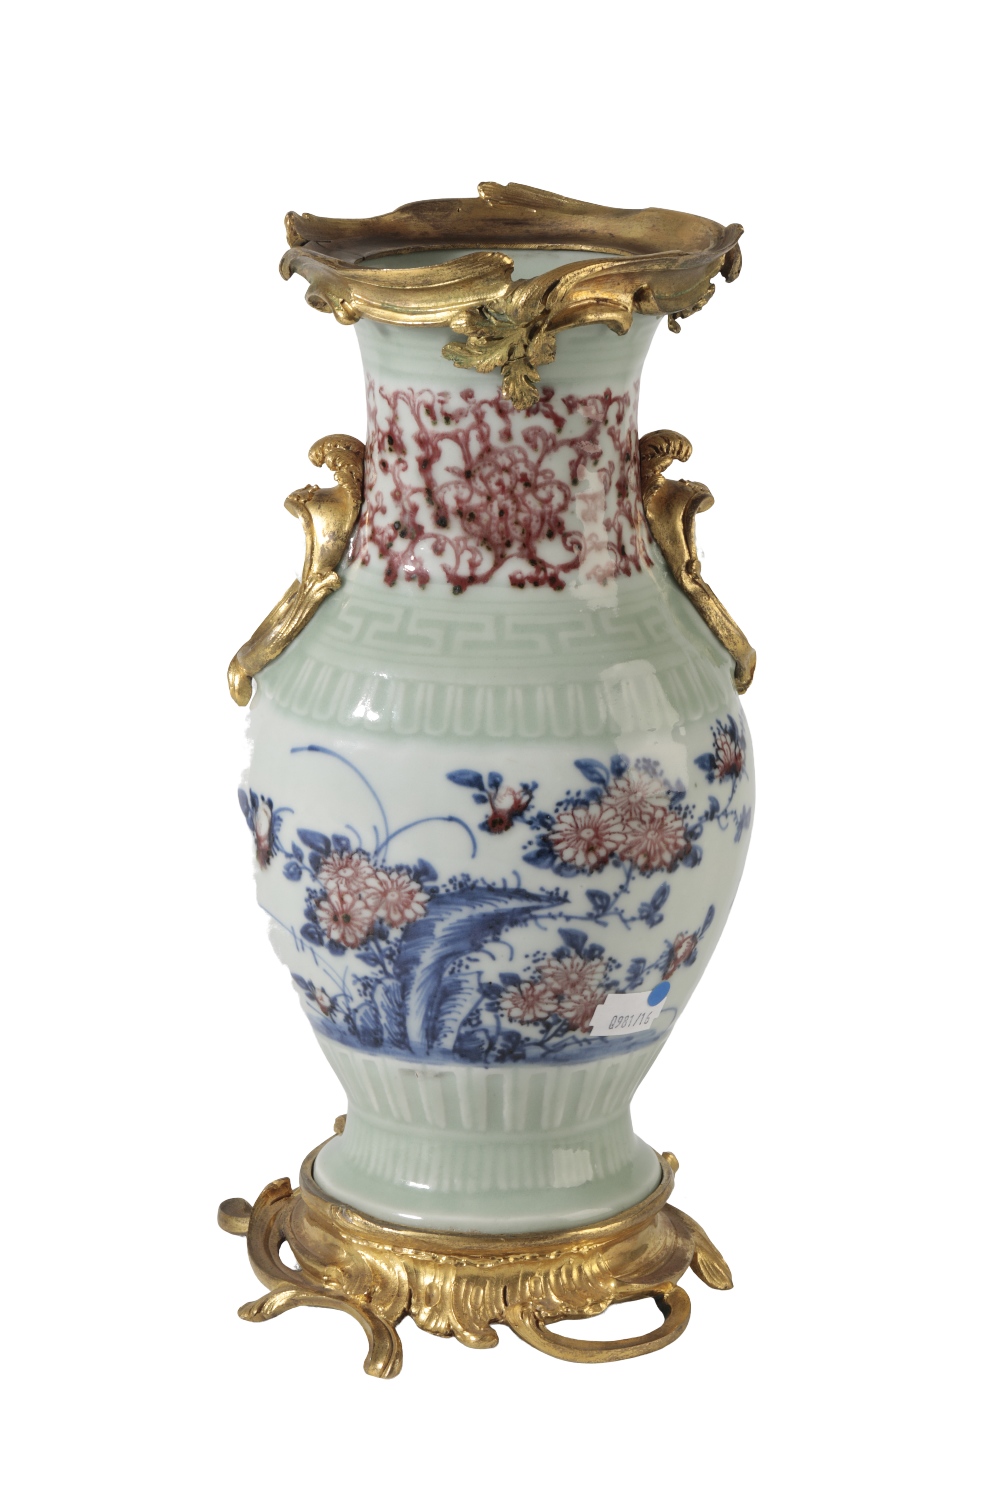 GOOD CELADON AND UNDER GLAZE-BLUE AND COPPER-RED BALUSTER VASE, QIANLONG SEAL MARK AND PERIOD